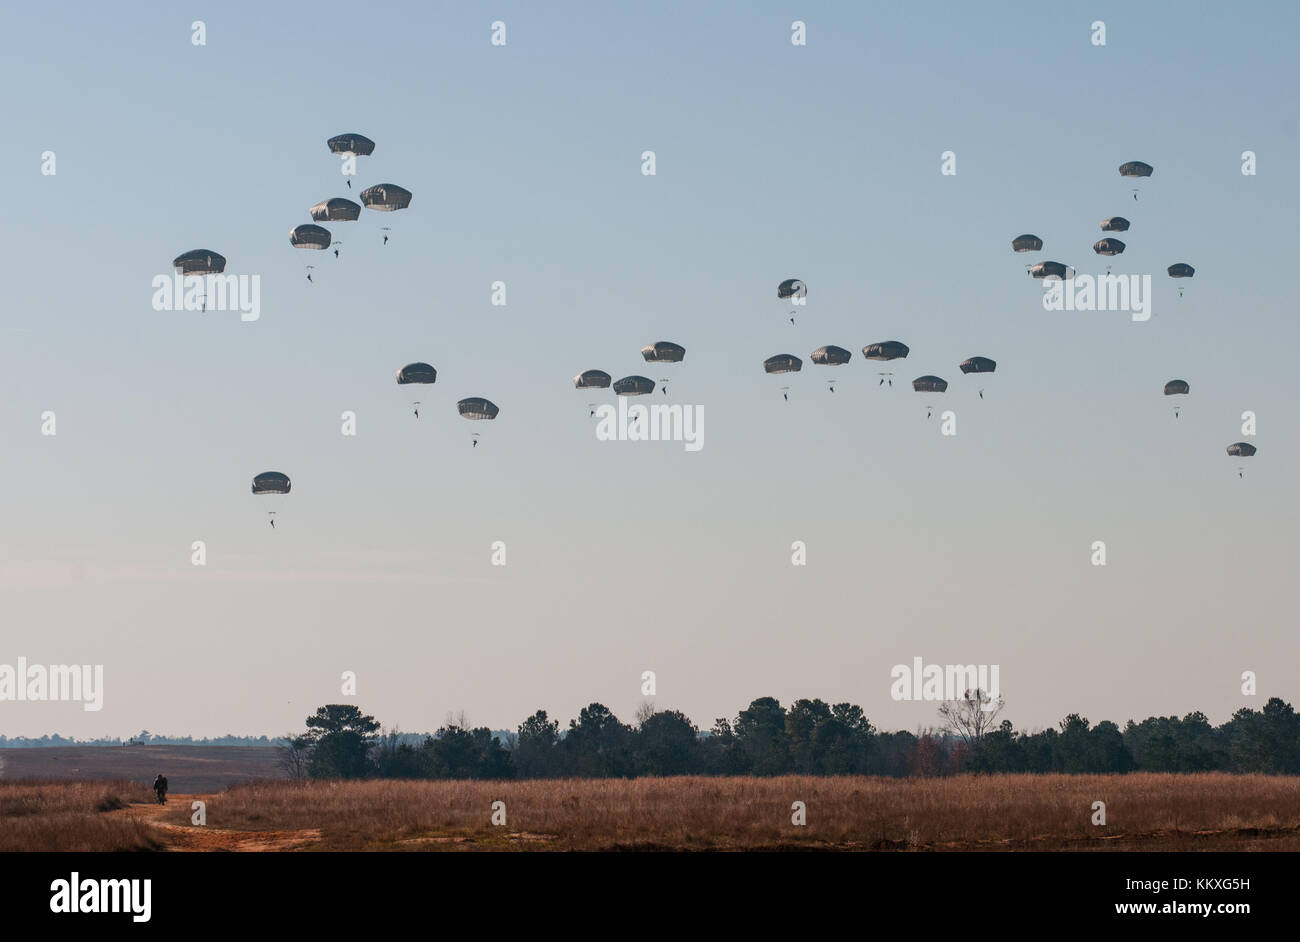 Fort Bragg, NC, USA. 1st Dec, 2017. Dec. 1, 2017 - FORT BRAGG, N.C., USA - The sky is filled with U.S. Army paratroopers at Sicily Drop Zone, Friday, during the 20th Annual Randy Oler Memorial Operation Toy Drop. The airborne operation, hosted by the U.S. Army Civil Affairs & Psychological Operations Command (Airborne), is the world's largest combined airborne operation with paratroopers from nine allied nations participating. The annual event allows paratroopers the opportunity to help children in communities surrounding Fort Bragg receive donated toys for the Christmas holiday Stock Photo